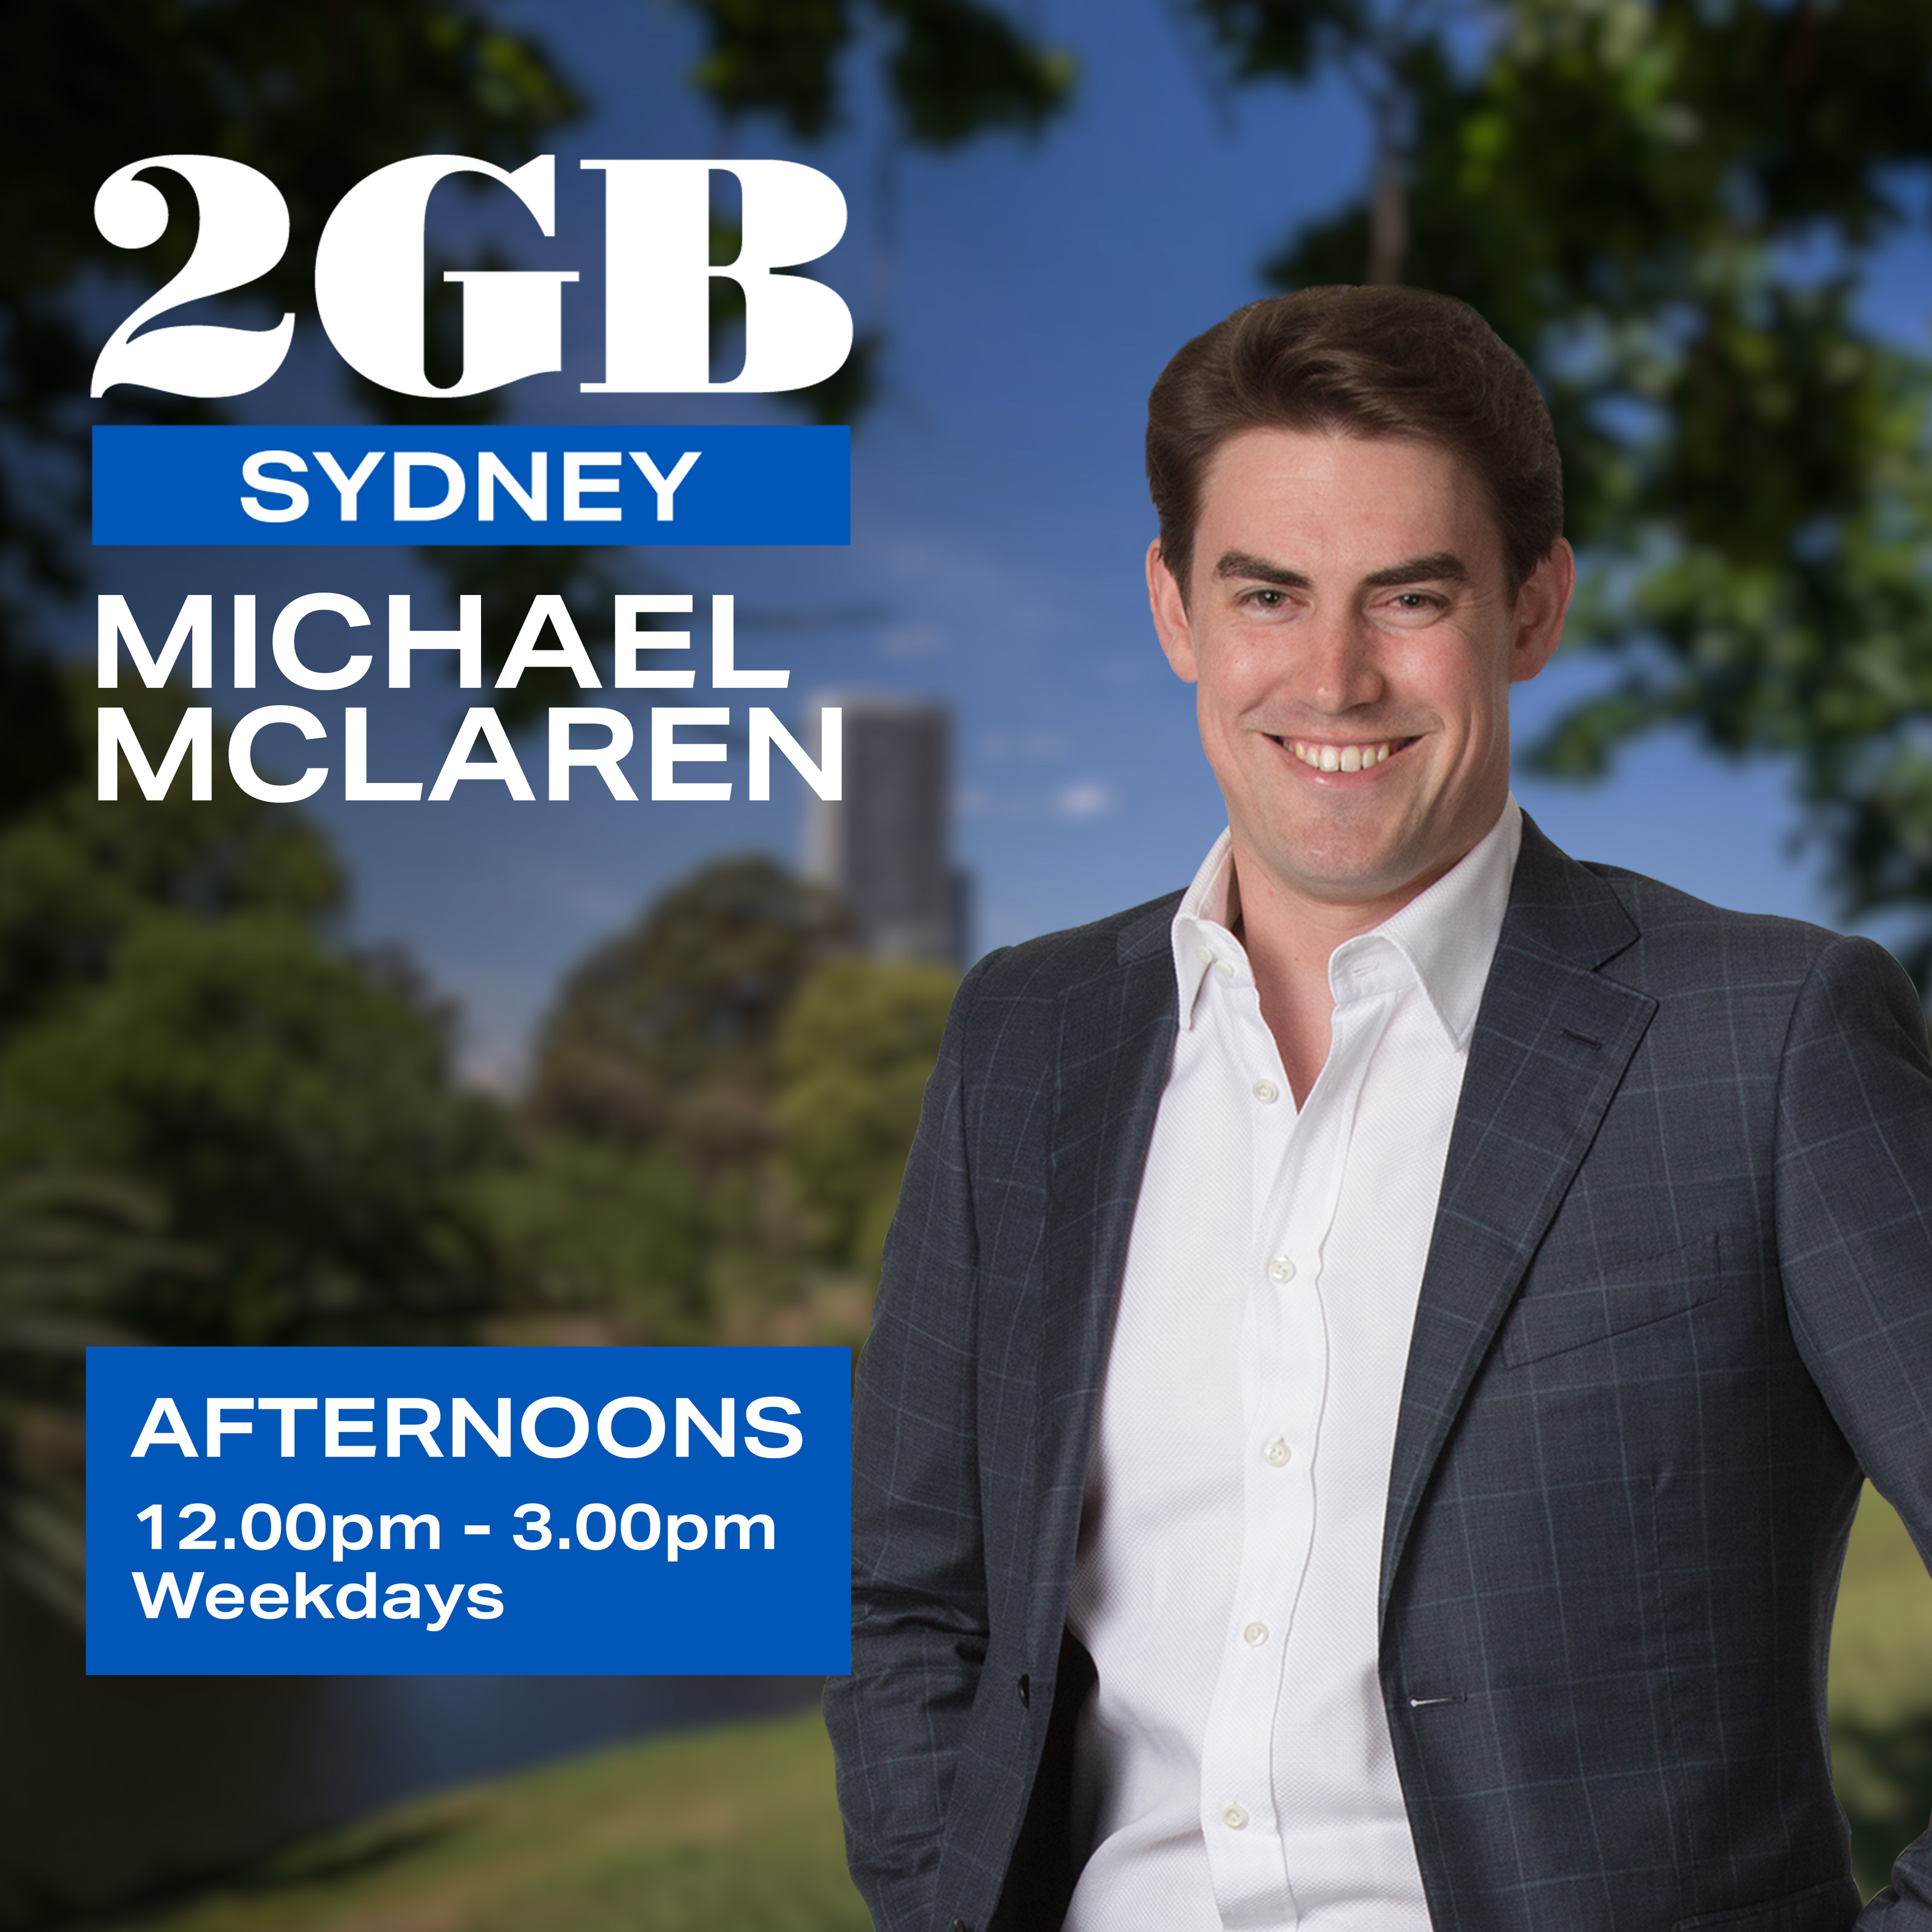 Afternoons with Michael McLaren - Tuesday, 23rd April